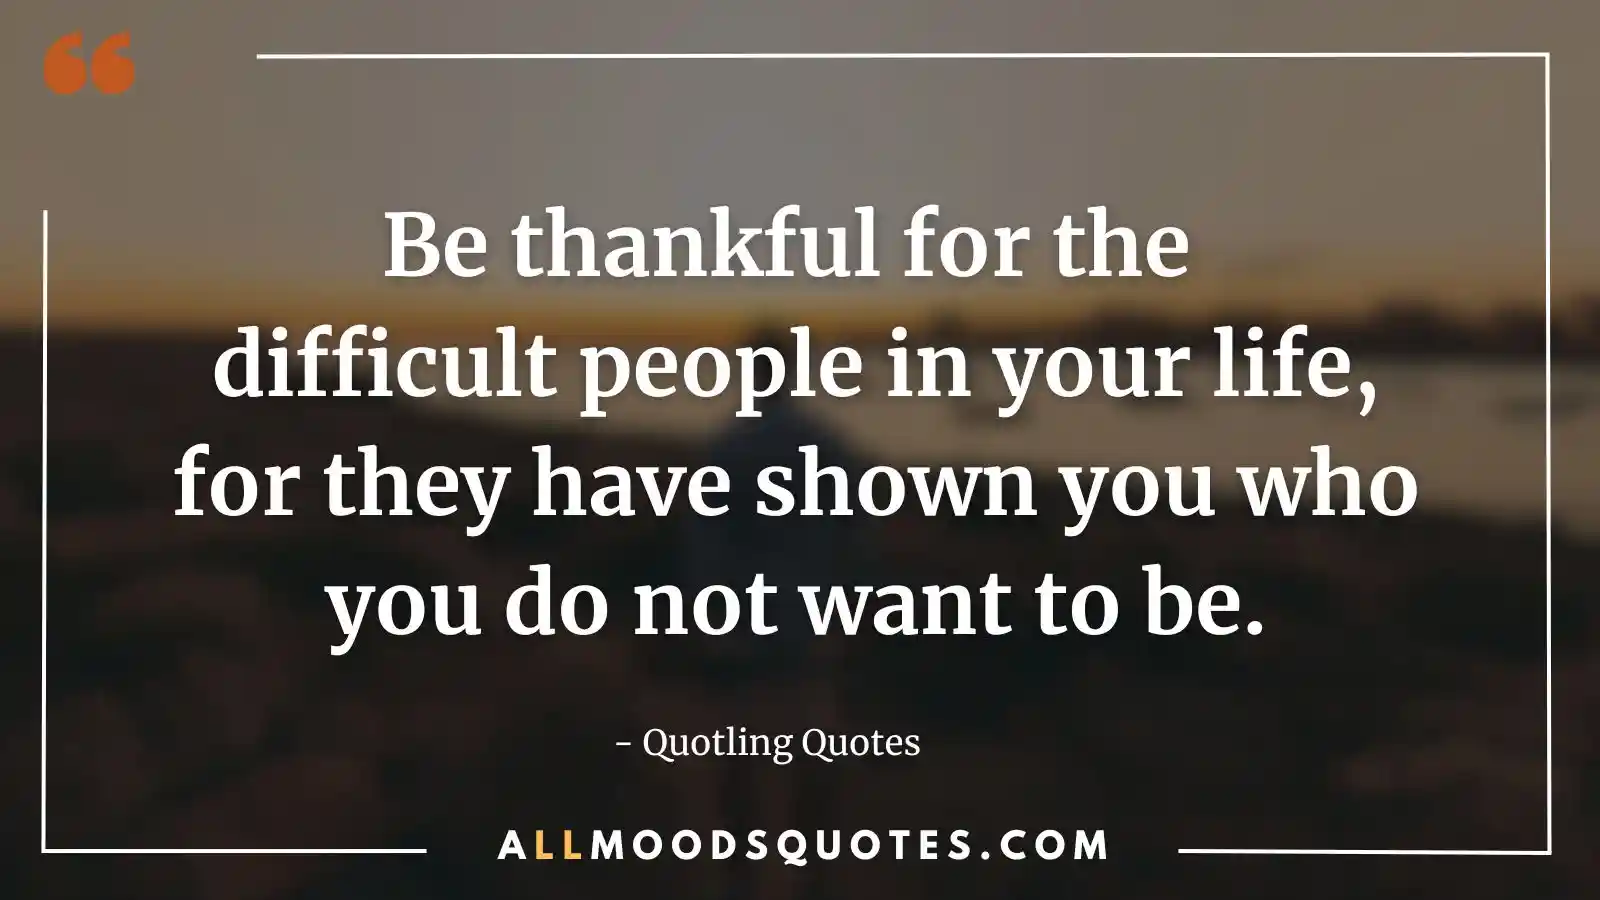 Be thankful for the difficult people in your life, for they have shown you who you do not want to be